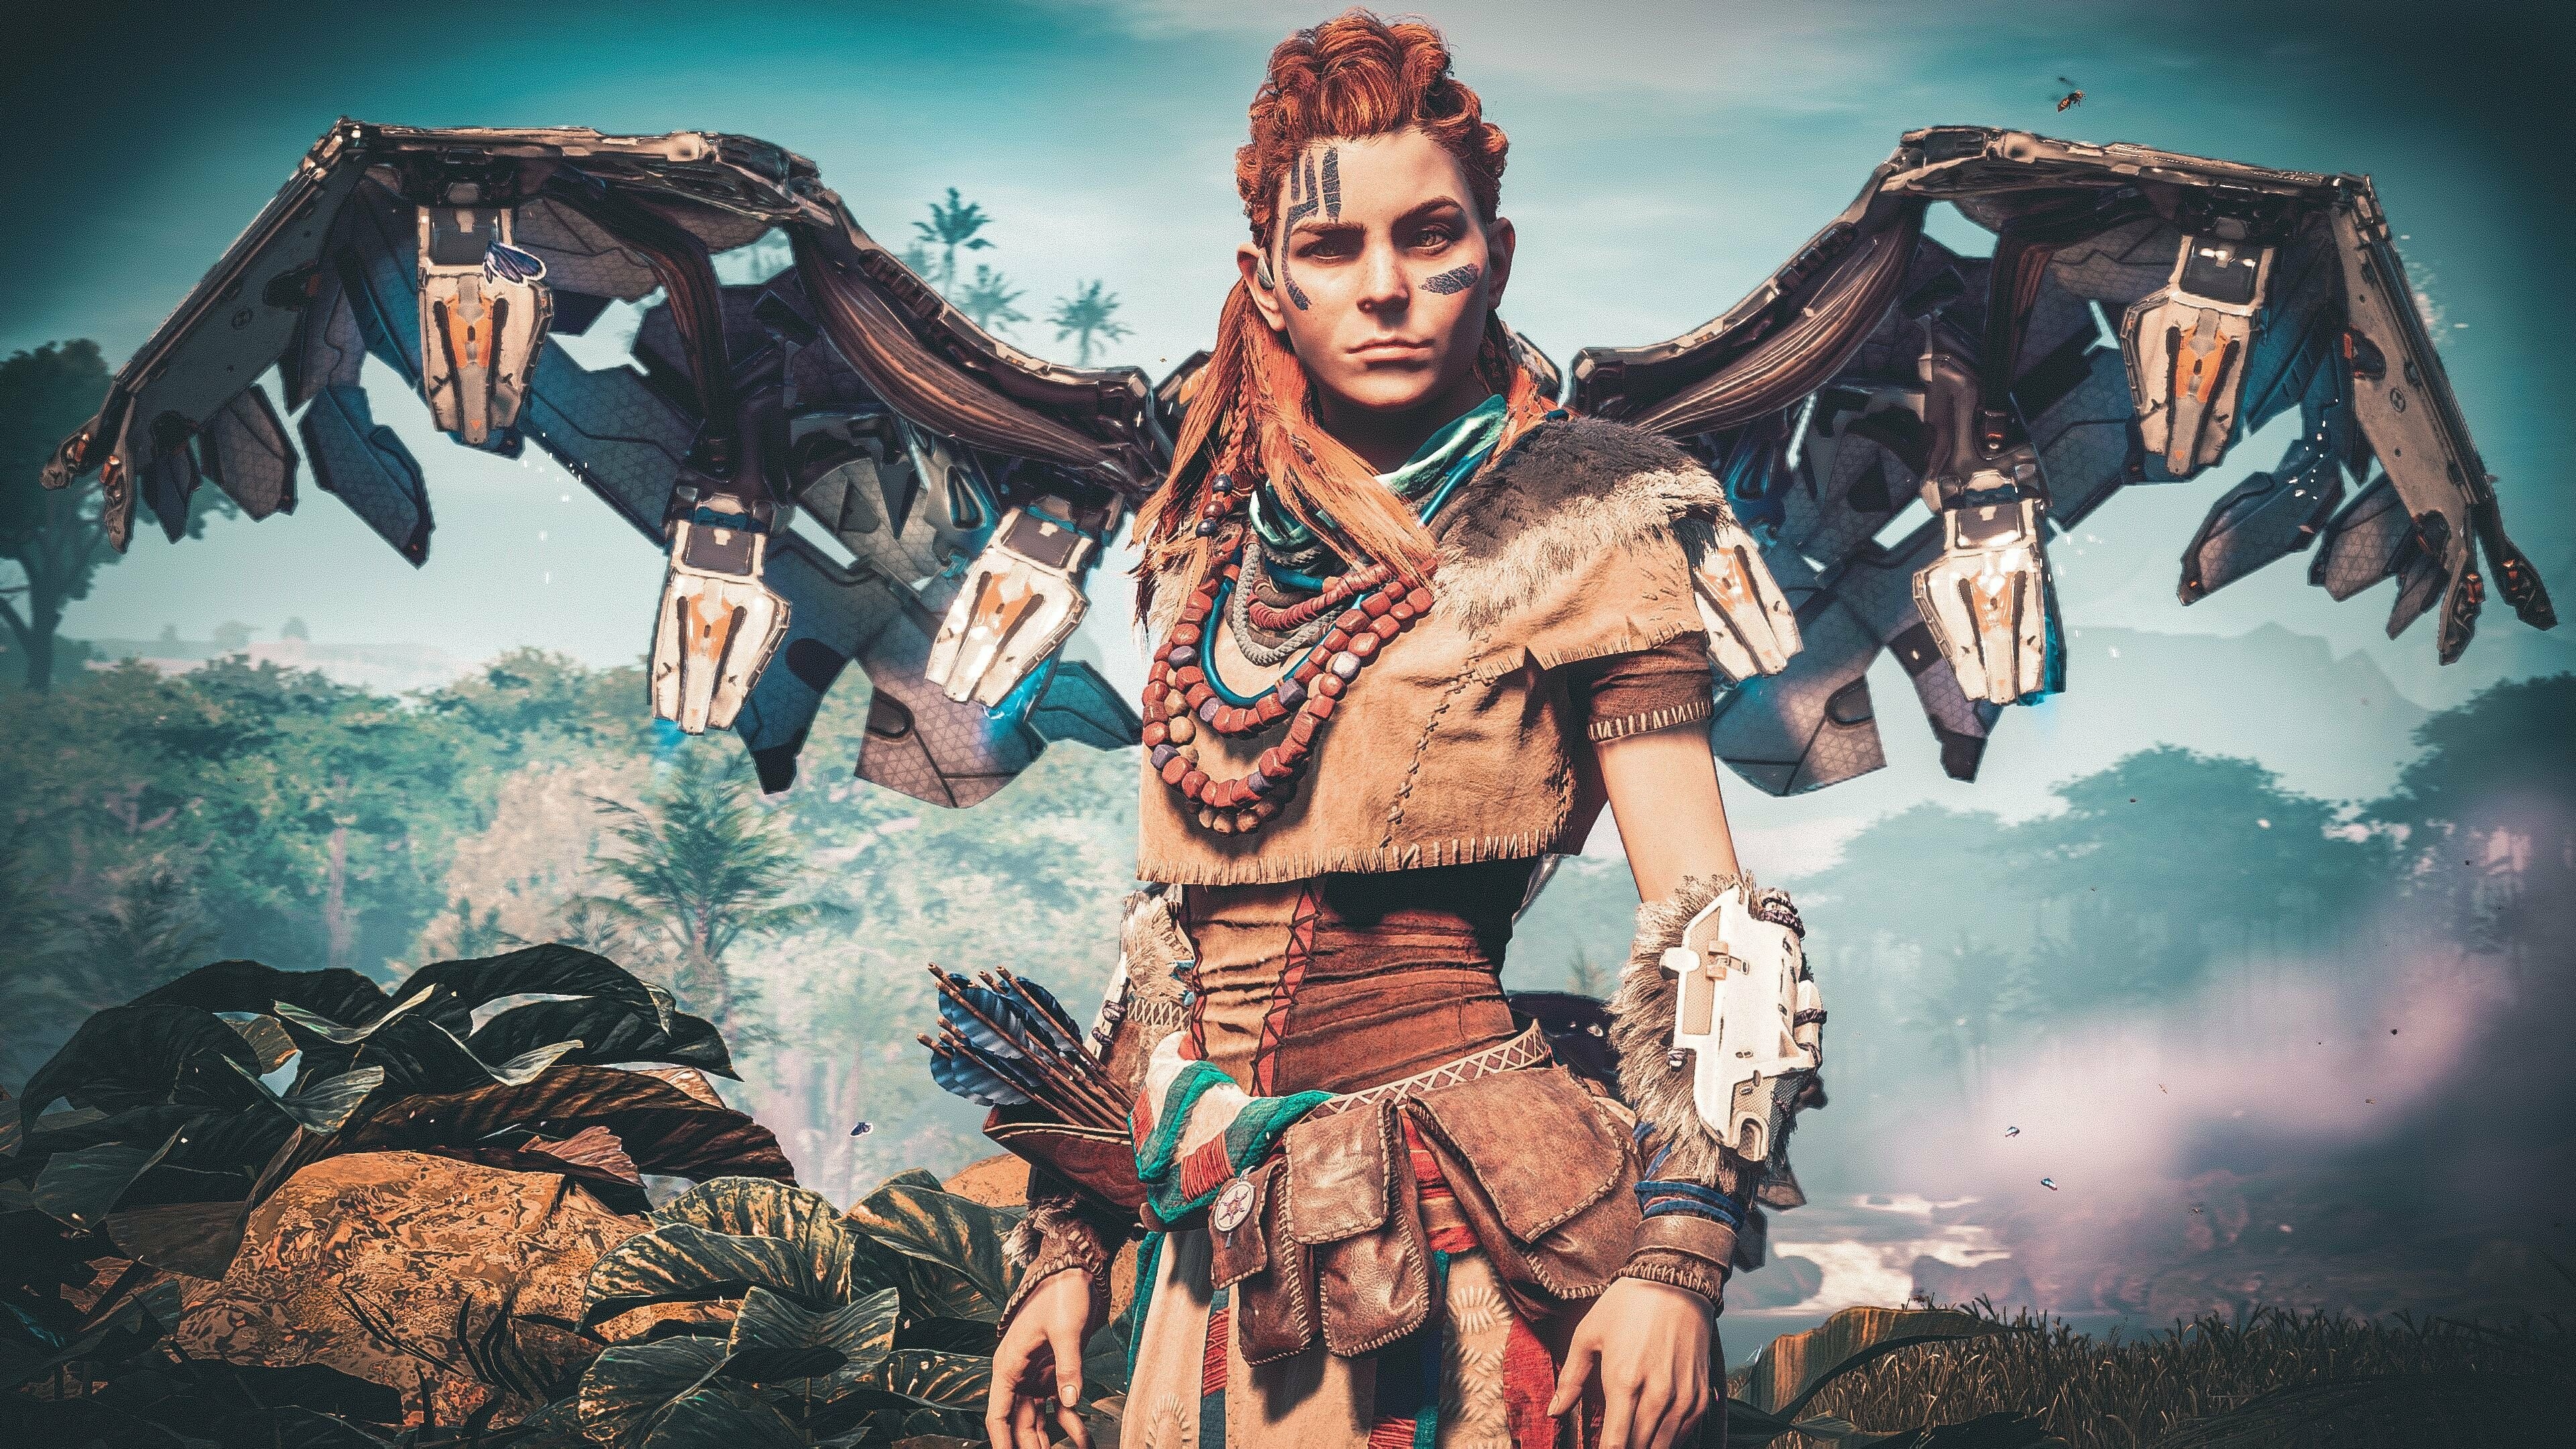 Horizon Zero Dawn: Aloy, A fictional character and protagonist of the 2017 video game. 3840x2160 4K Background.